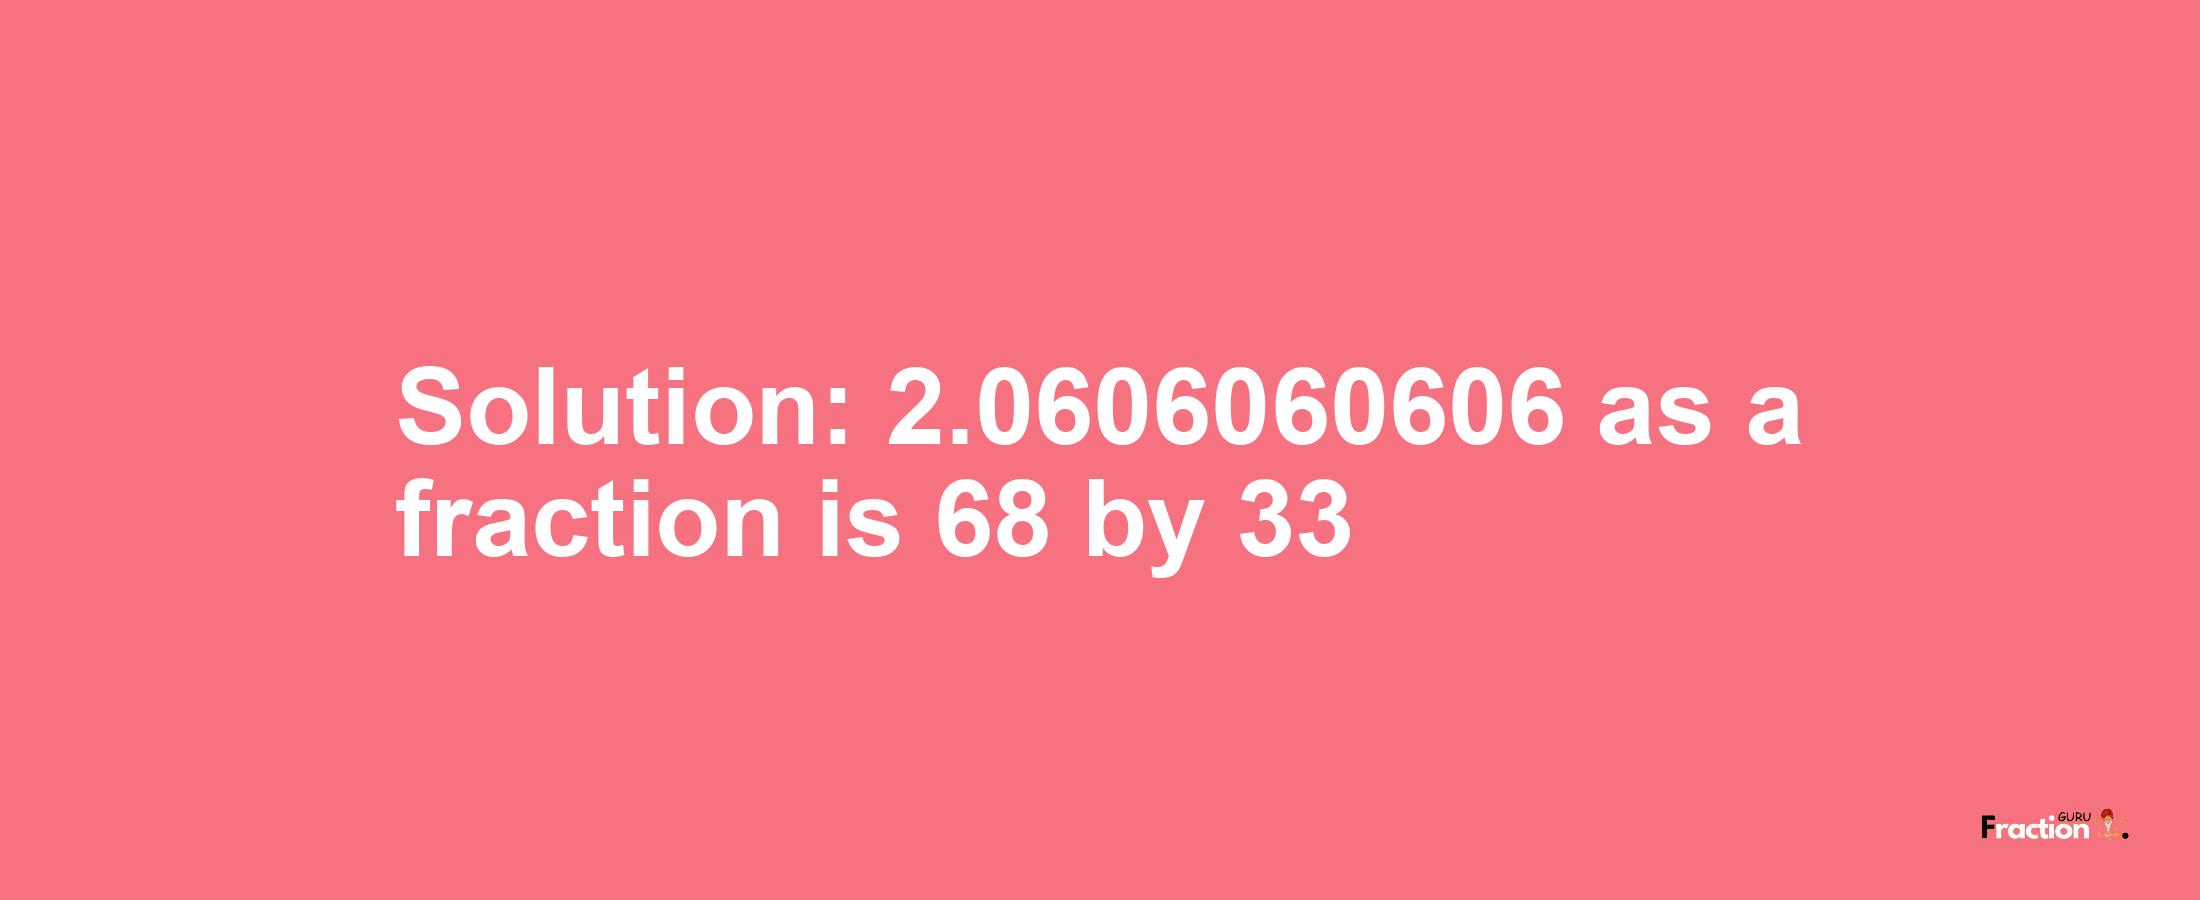 Solution:2.0606060606 as a fraction is 68/33